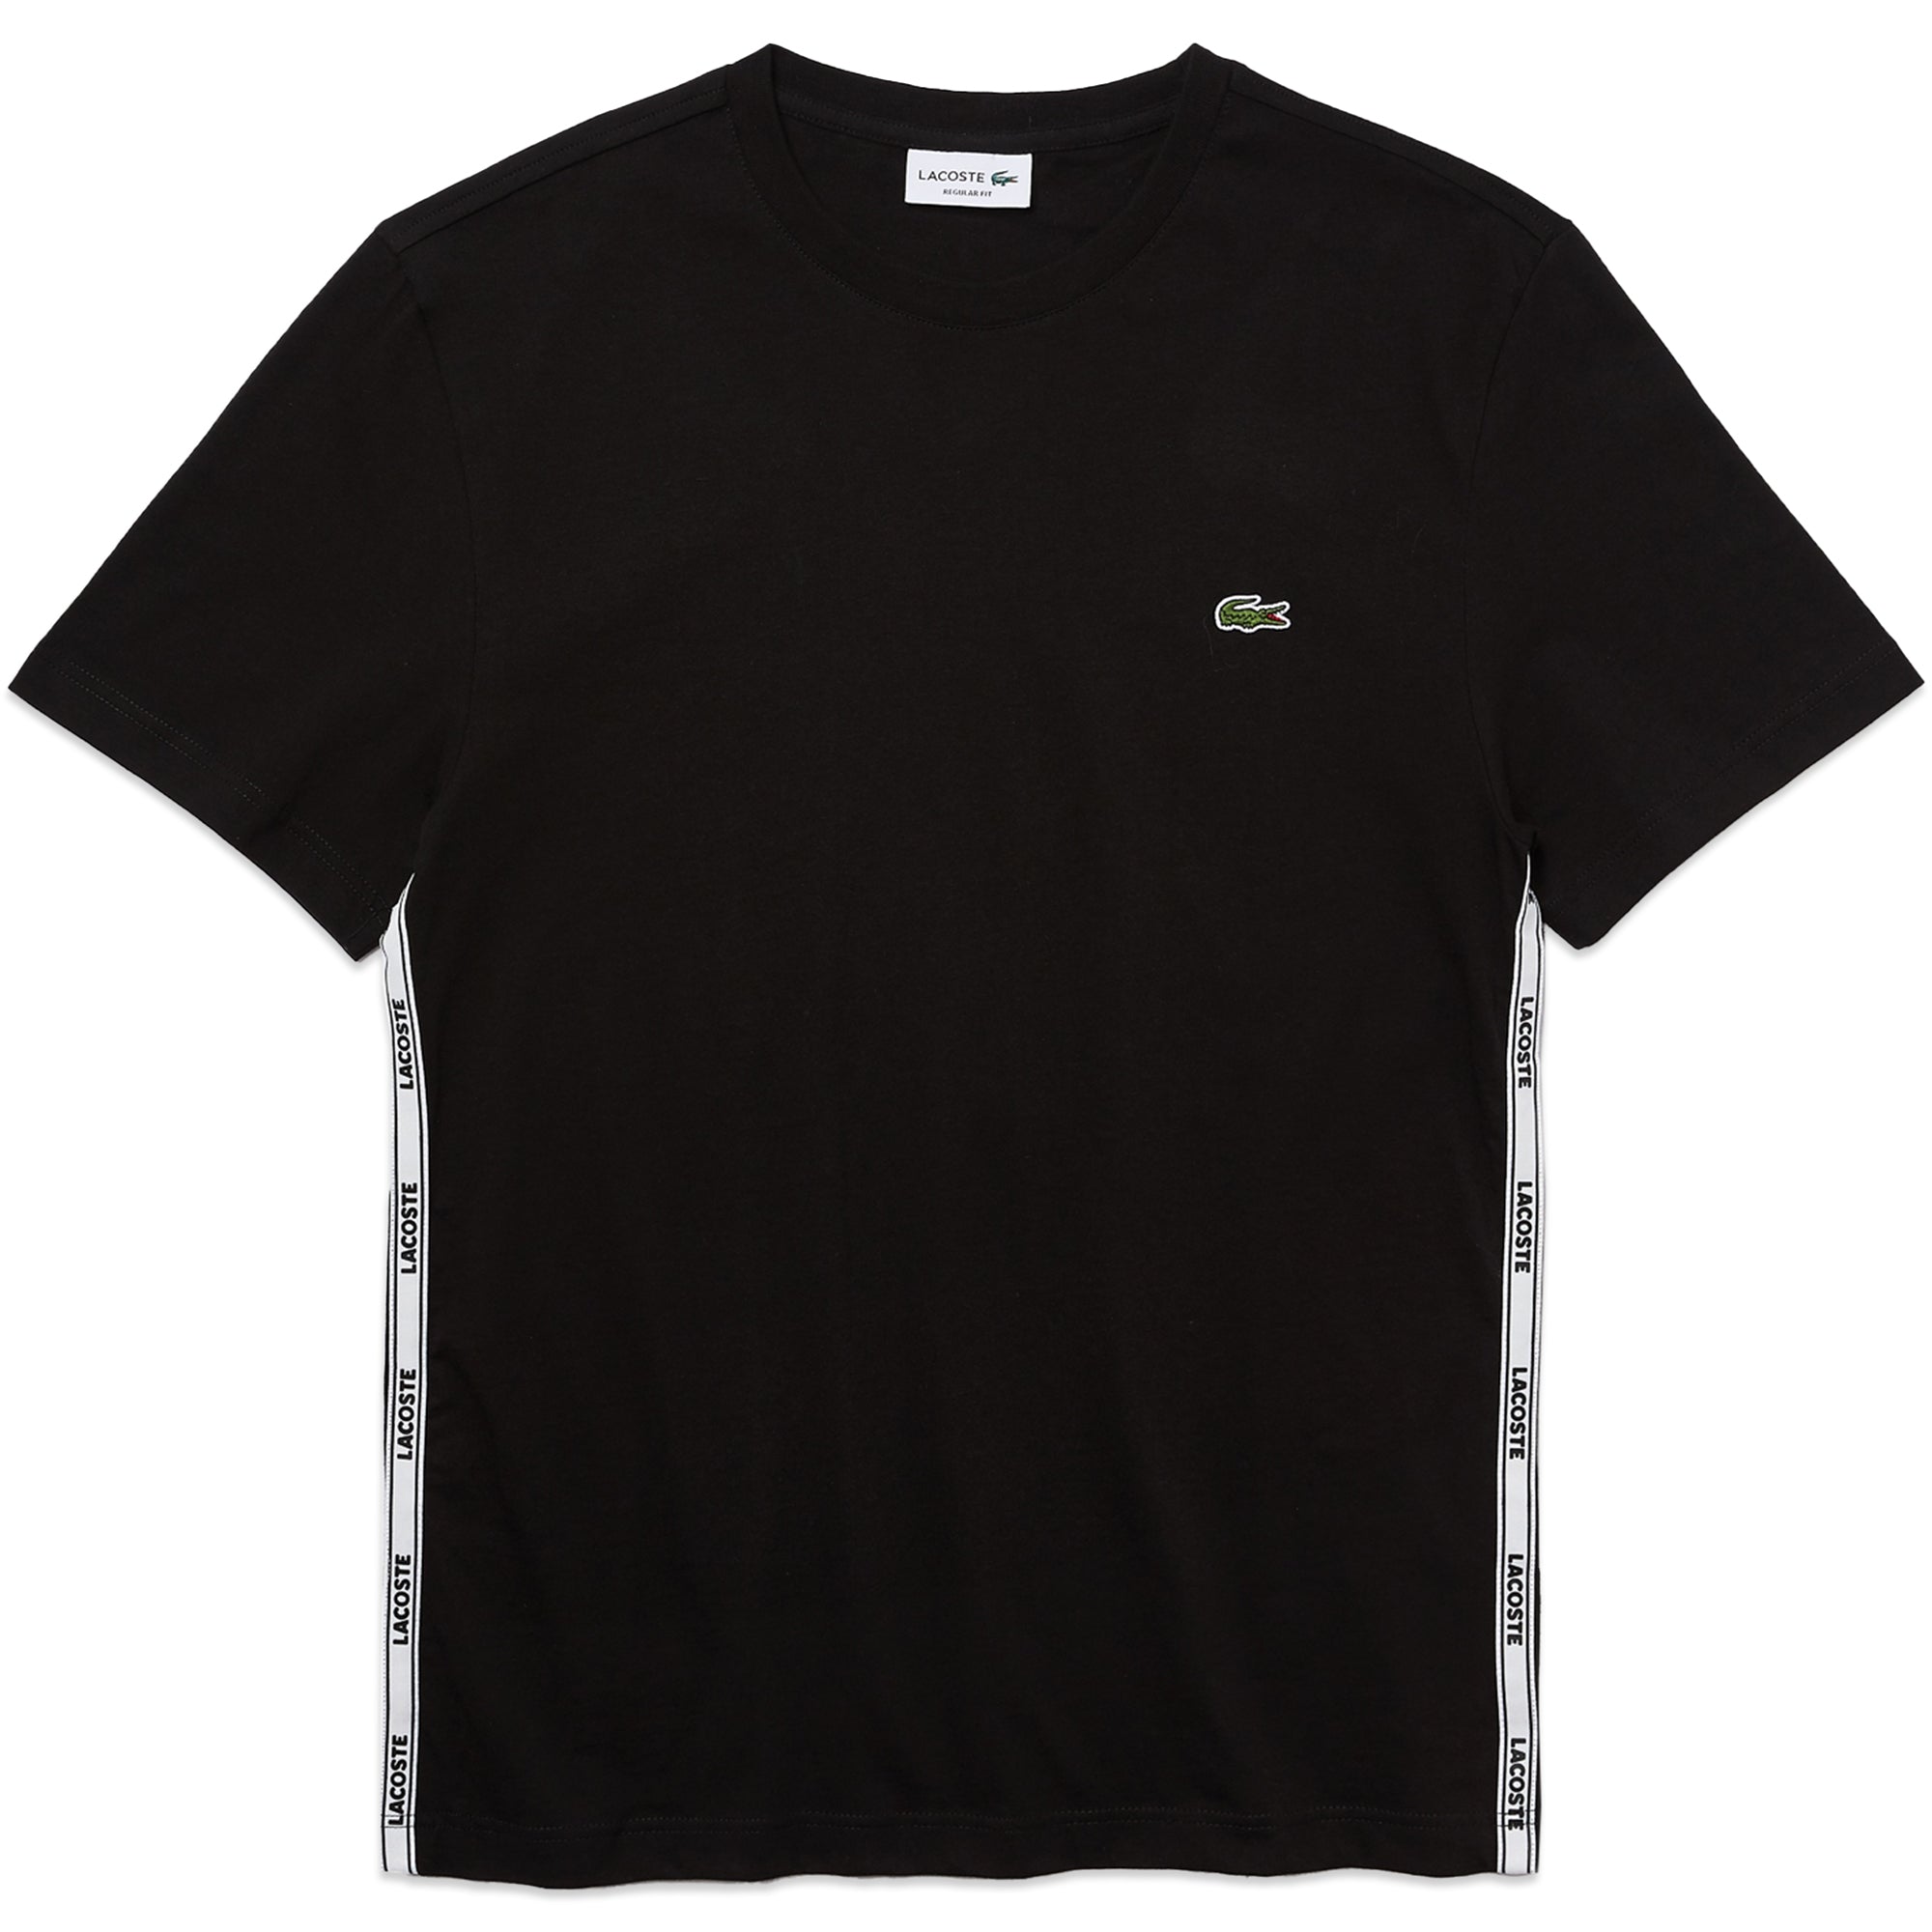 Lacoste Side Tape T-Shirt TH1207 - Black